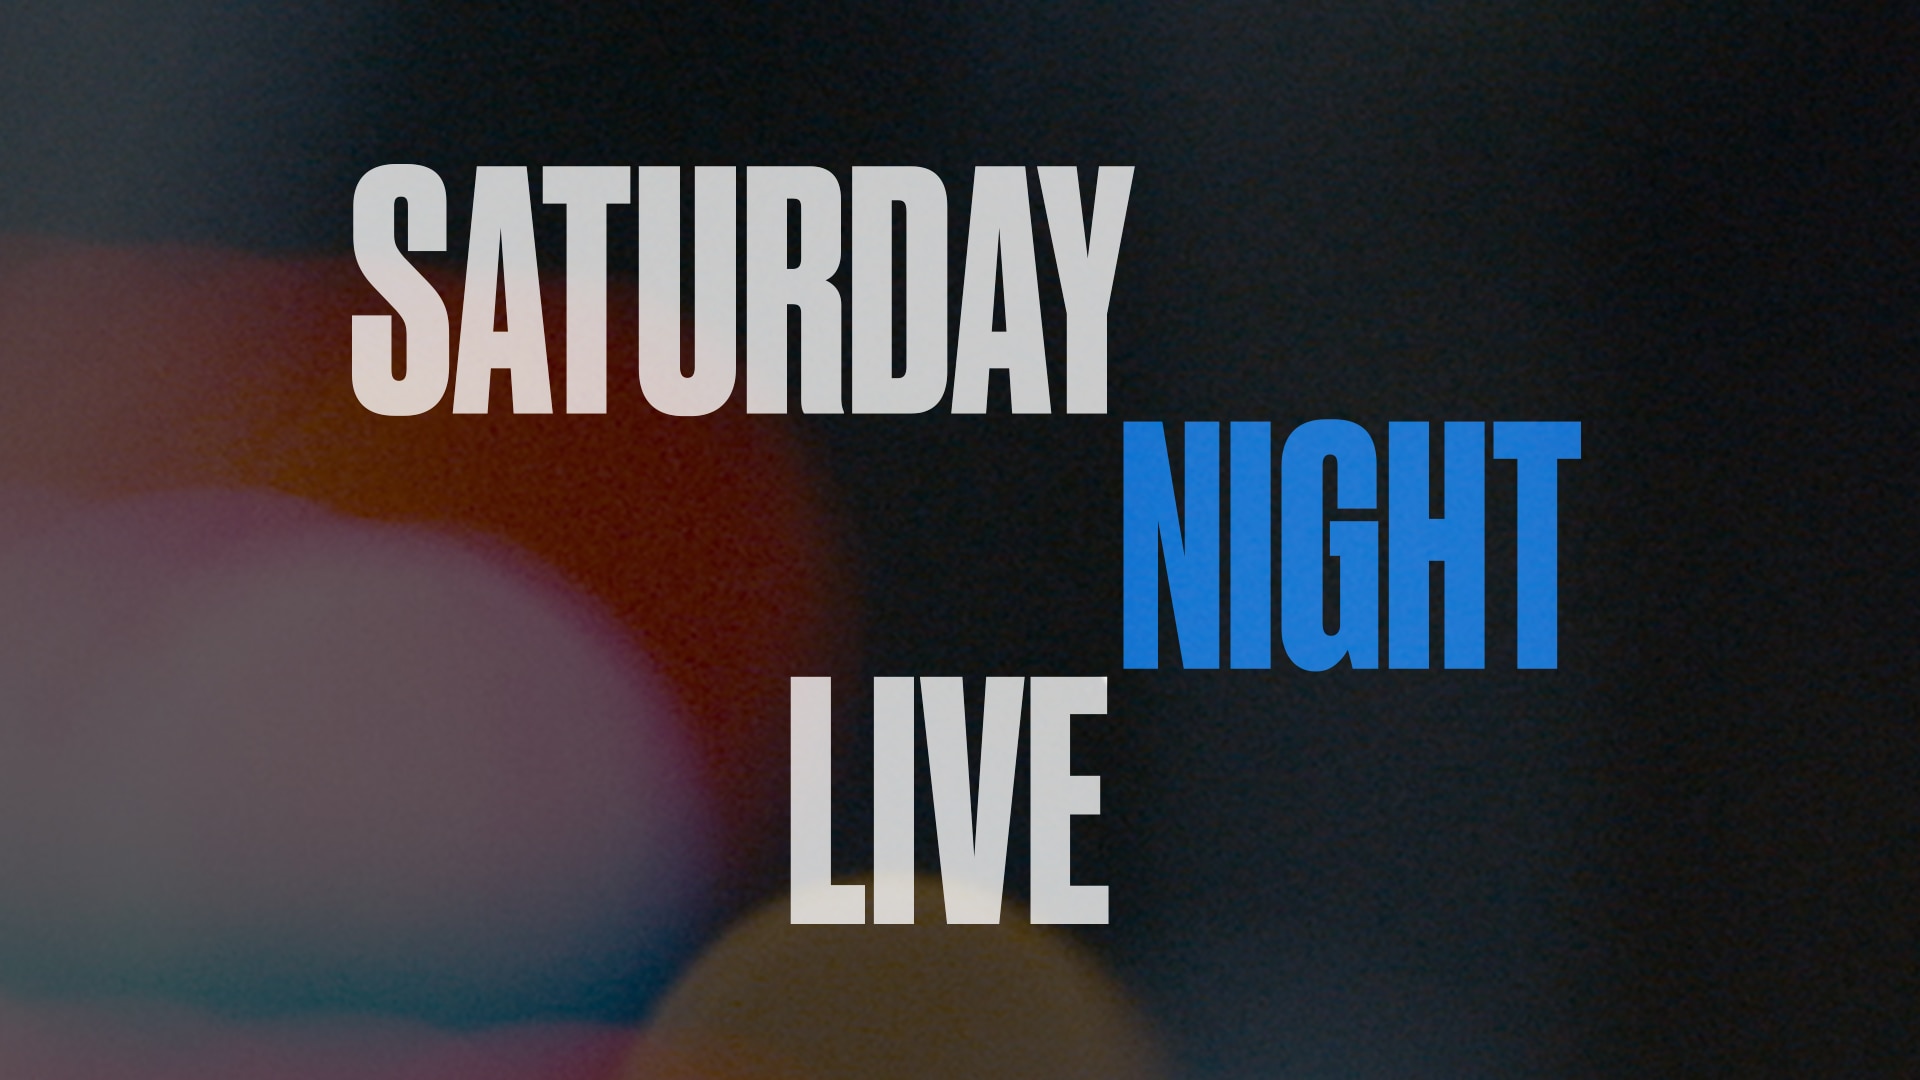 Saturday Night Live Has Announced First Three Weeks Of Hosts And Musical Guests.